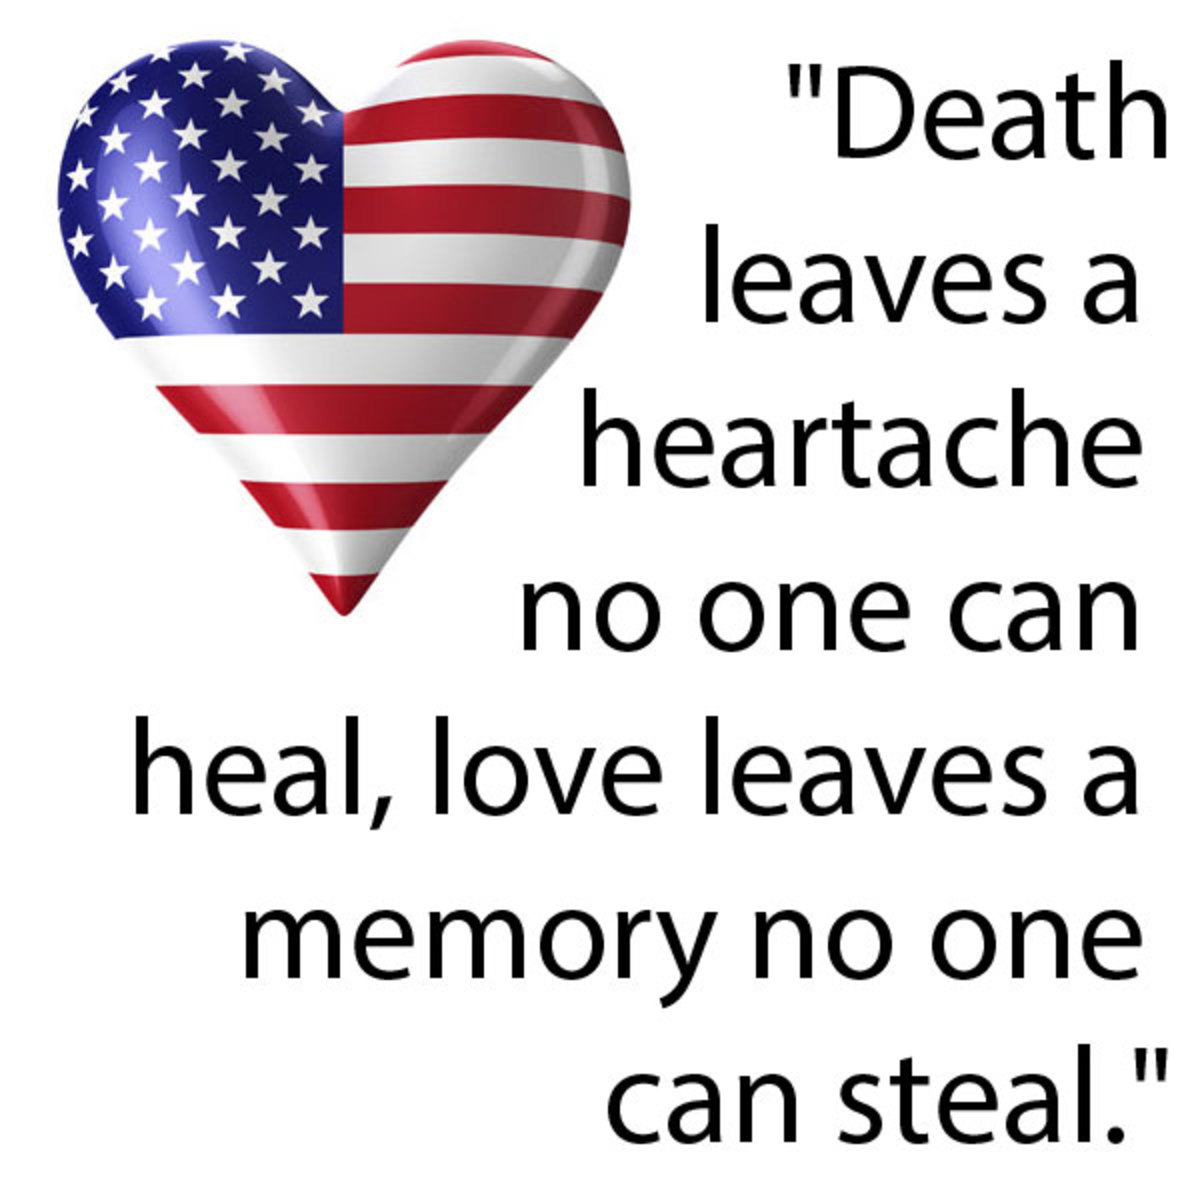 Death leaves a heartache no one can heal, love leaves a memory no one can steal. 